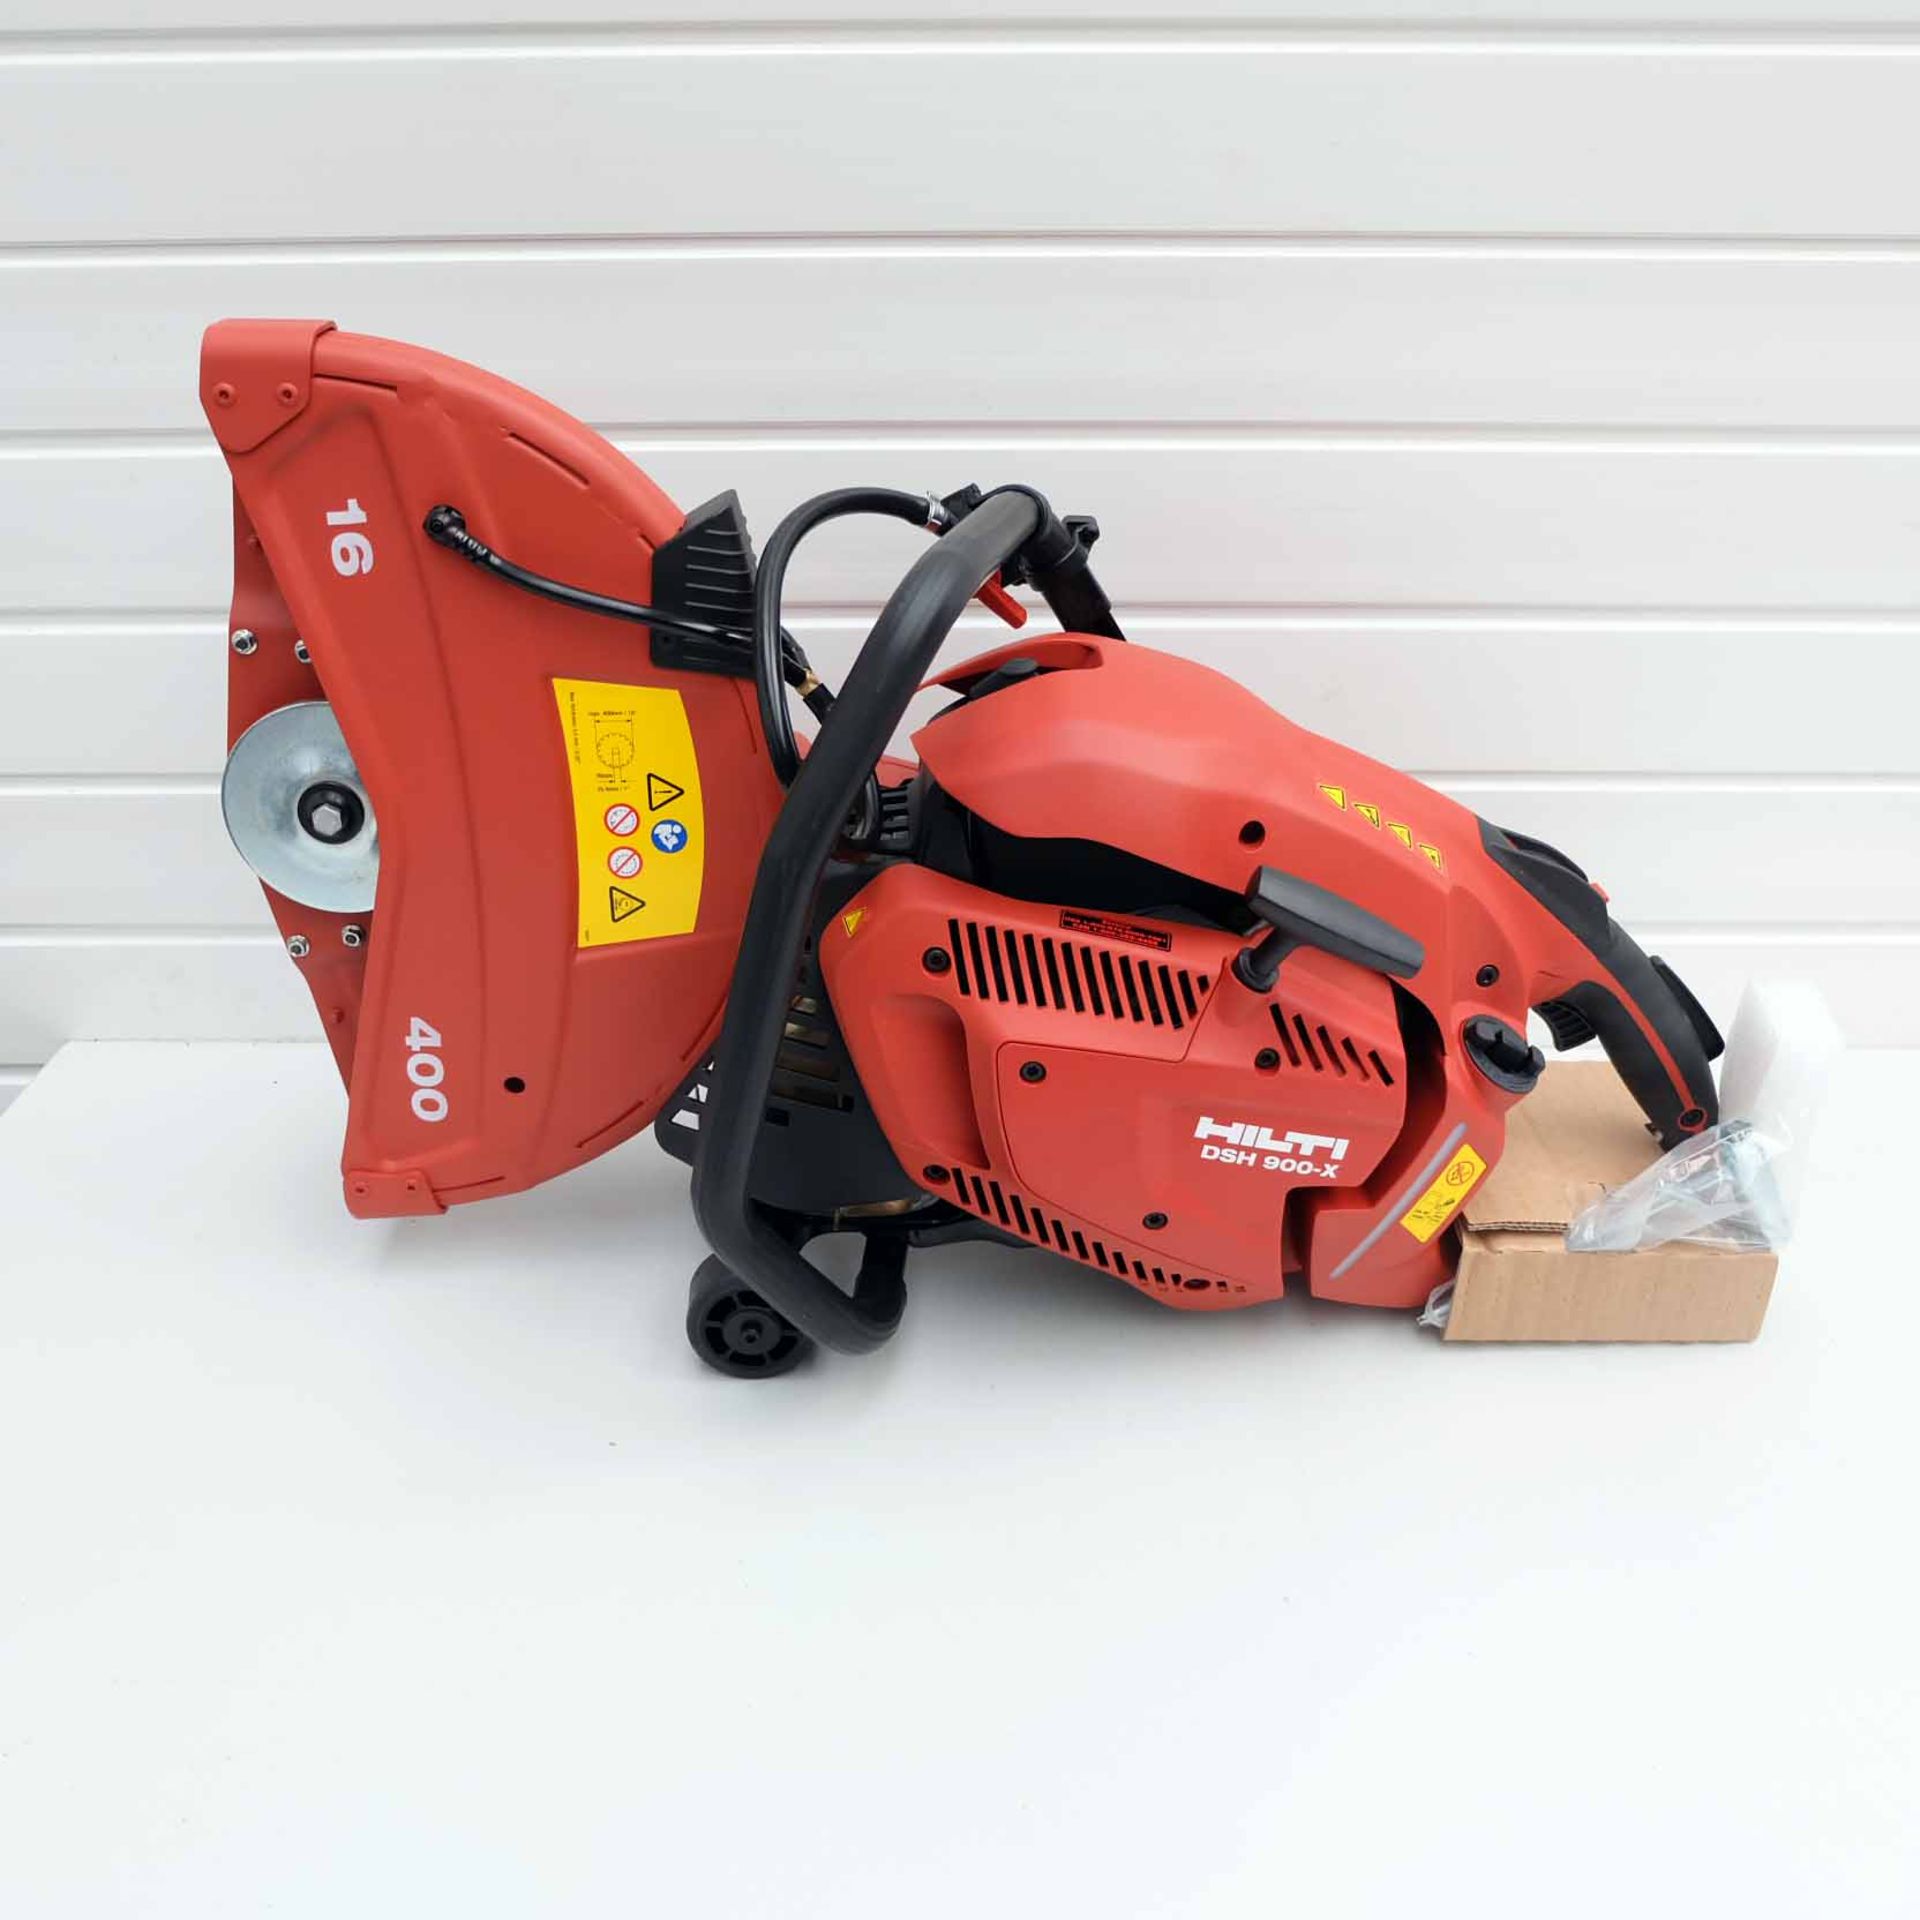 Hilti Hand Held Gas Saw. Model DSH 900-X 16". Complete With SP-16"x1" Blade. Easy Start Auto-Choke S - Image 3 of 22